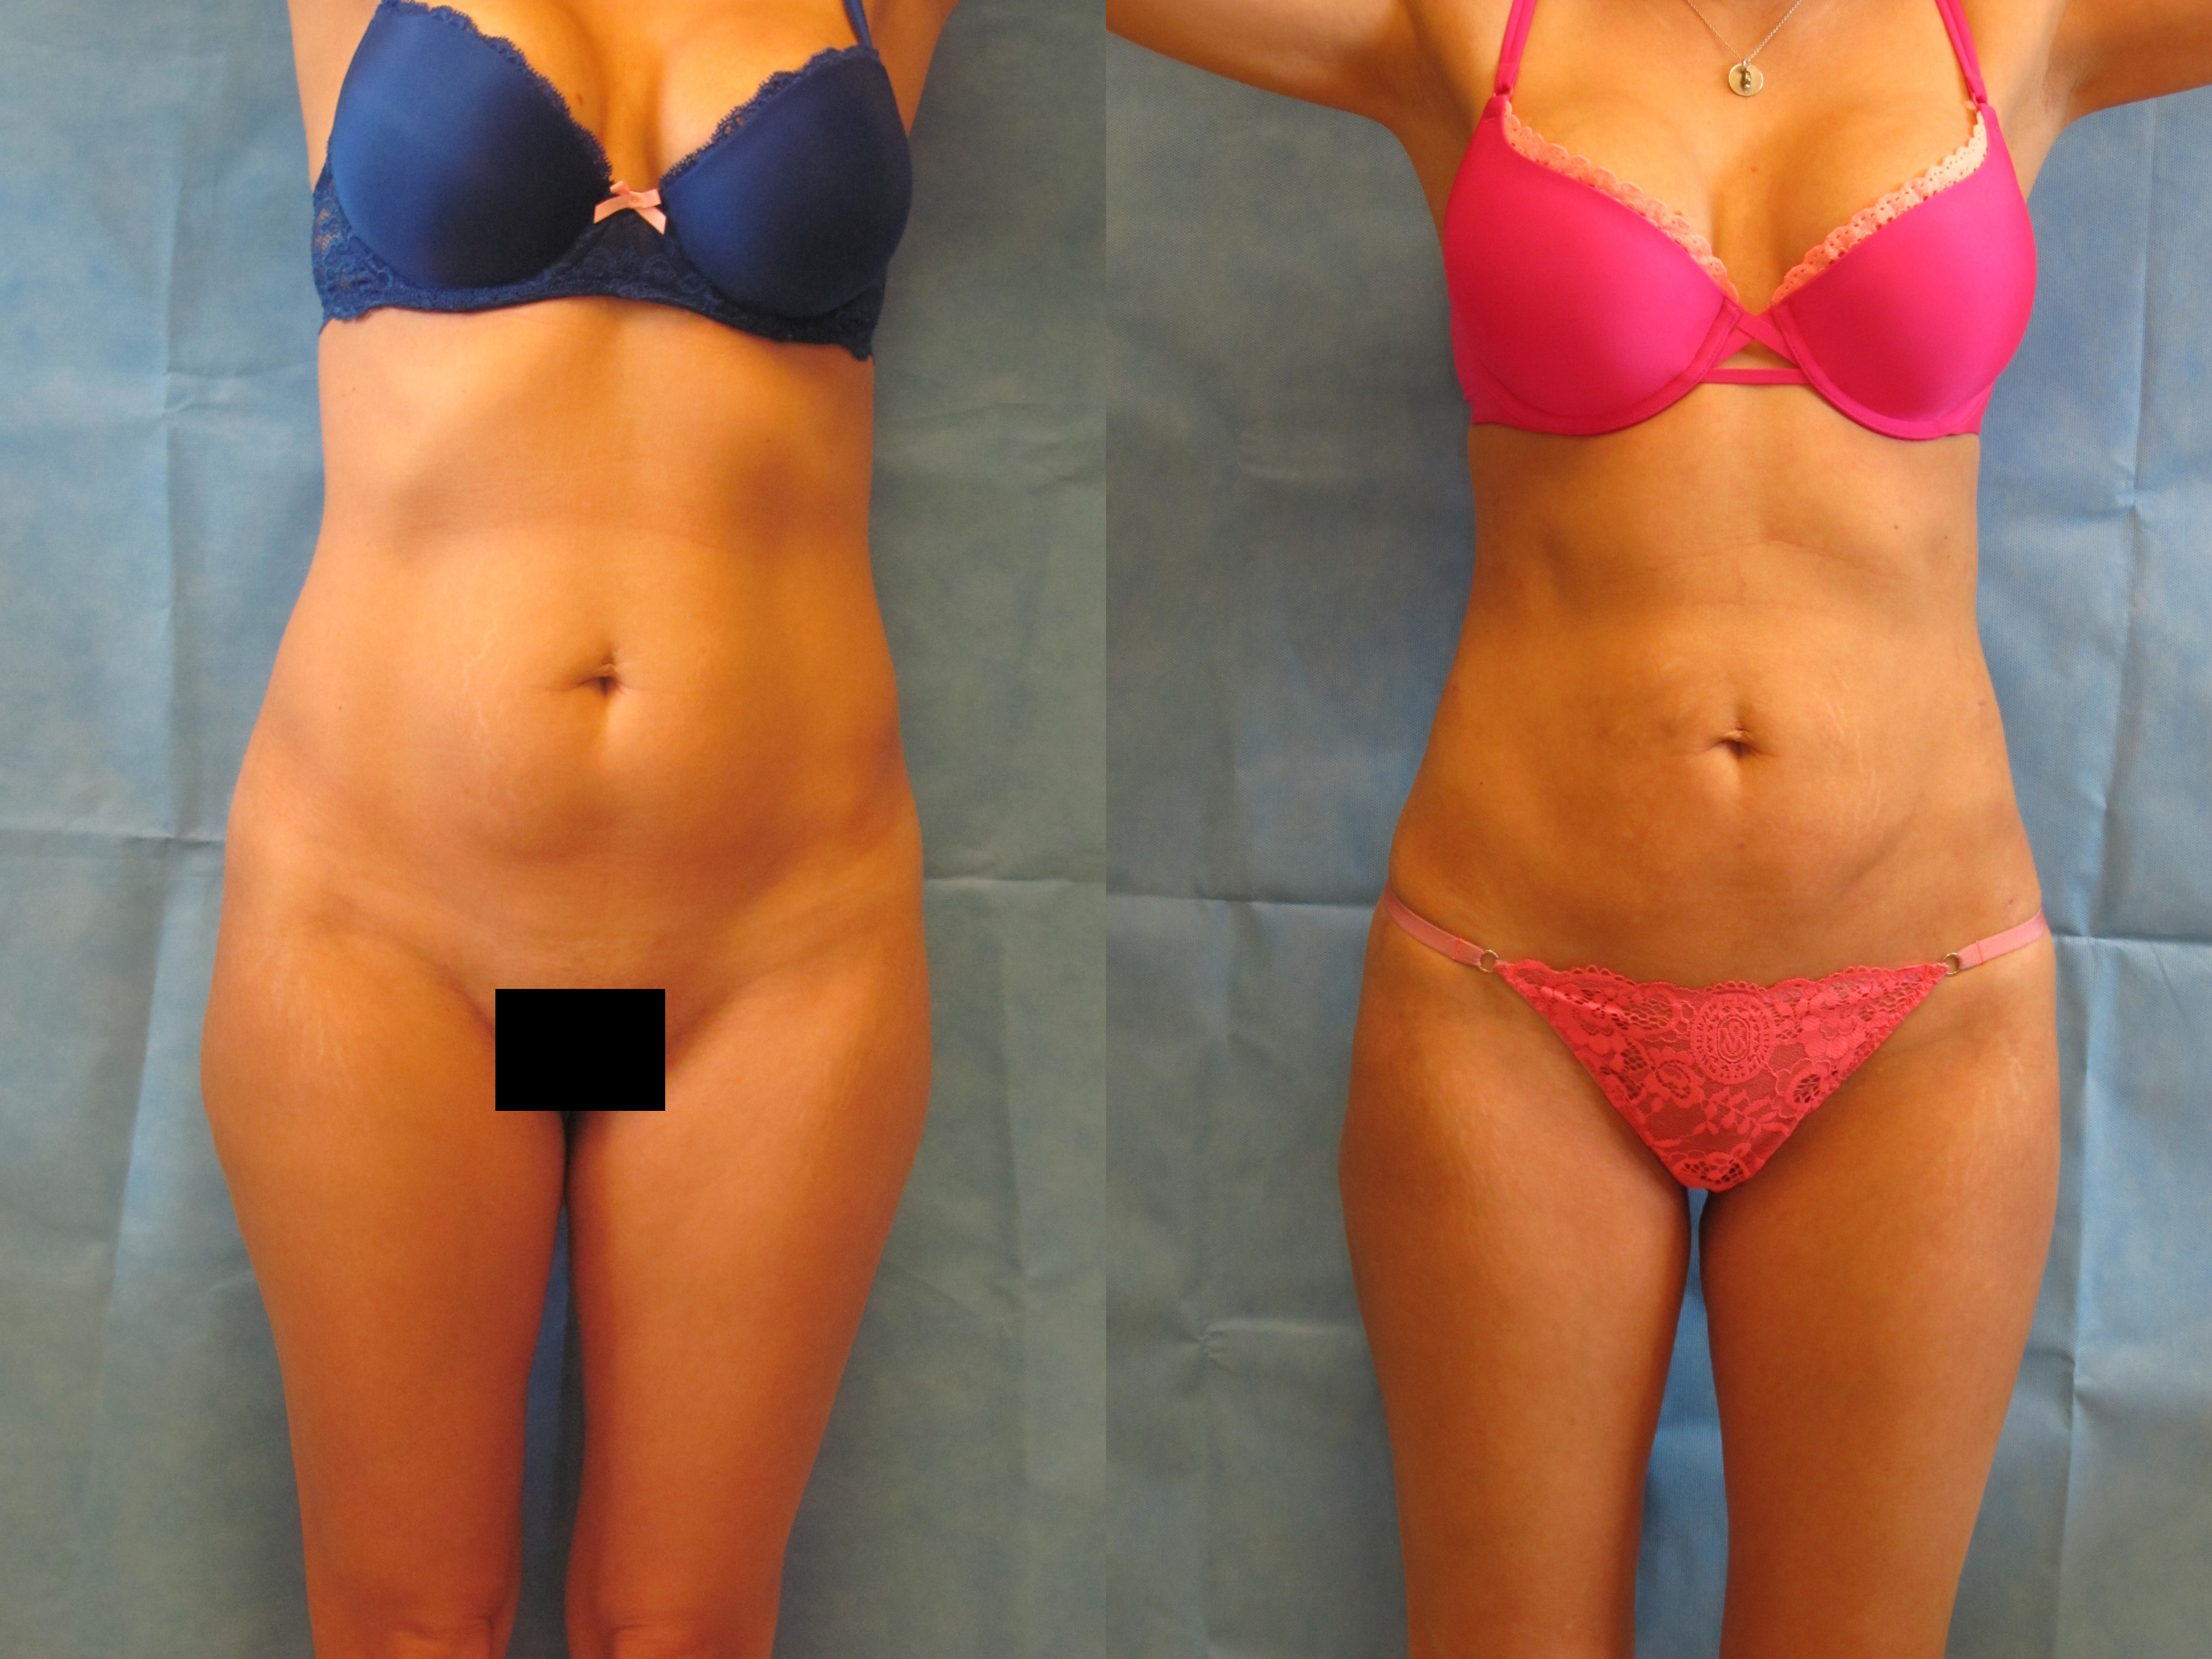 How Much Does Lipo 360 Cost? - Exert Clinic